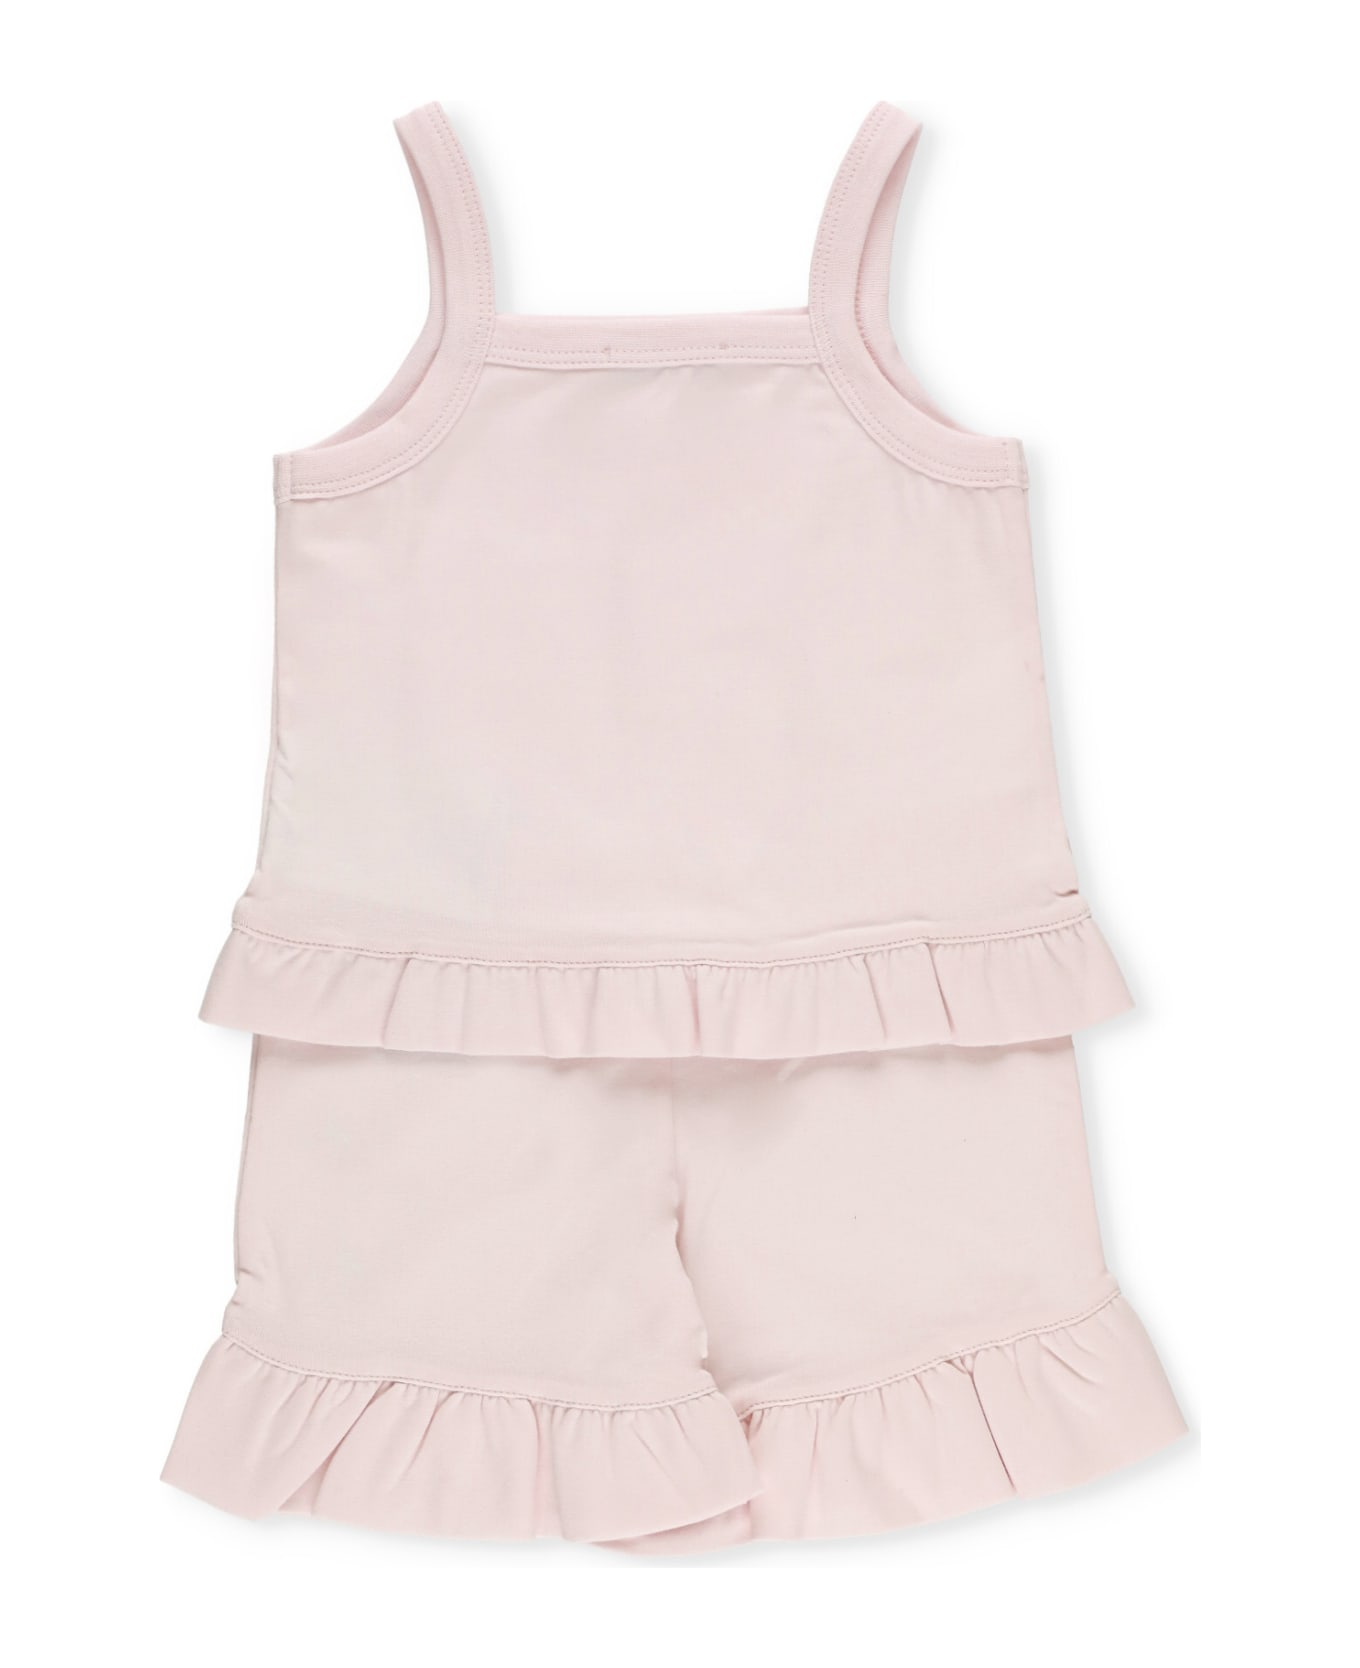 Moncler Cotton Two-piece Set - Pink ボディスーツ＆セットアップ